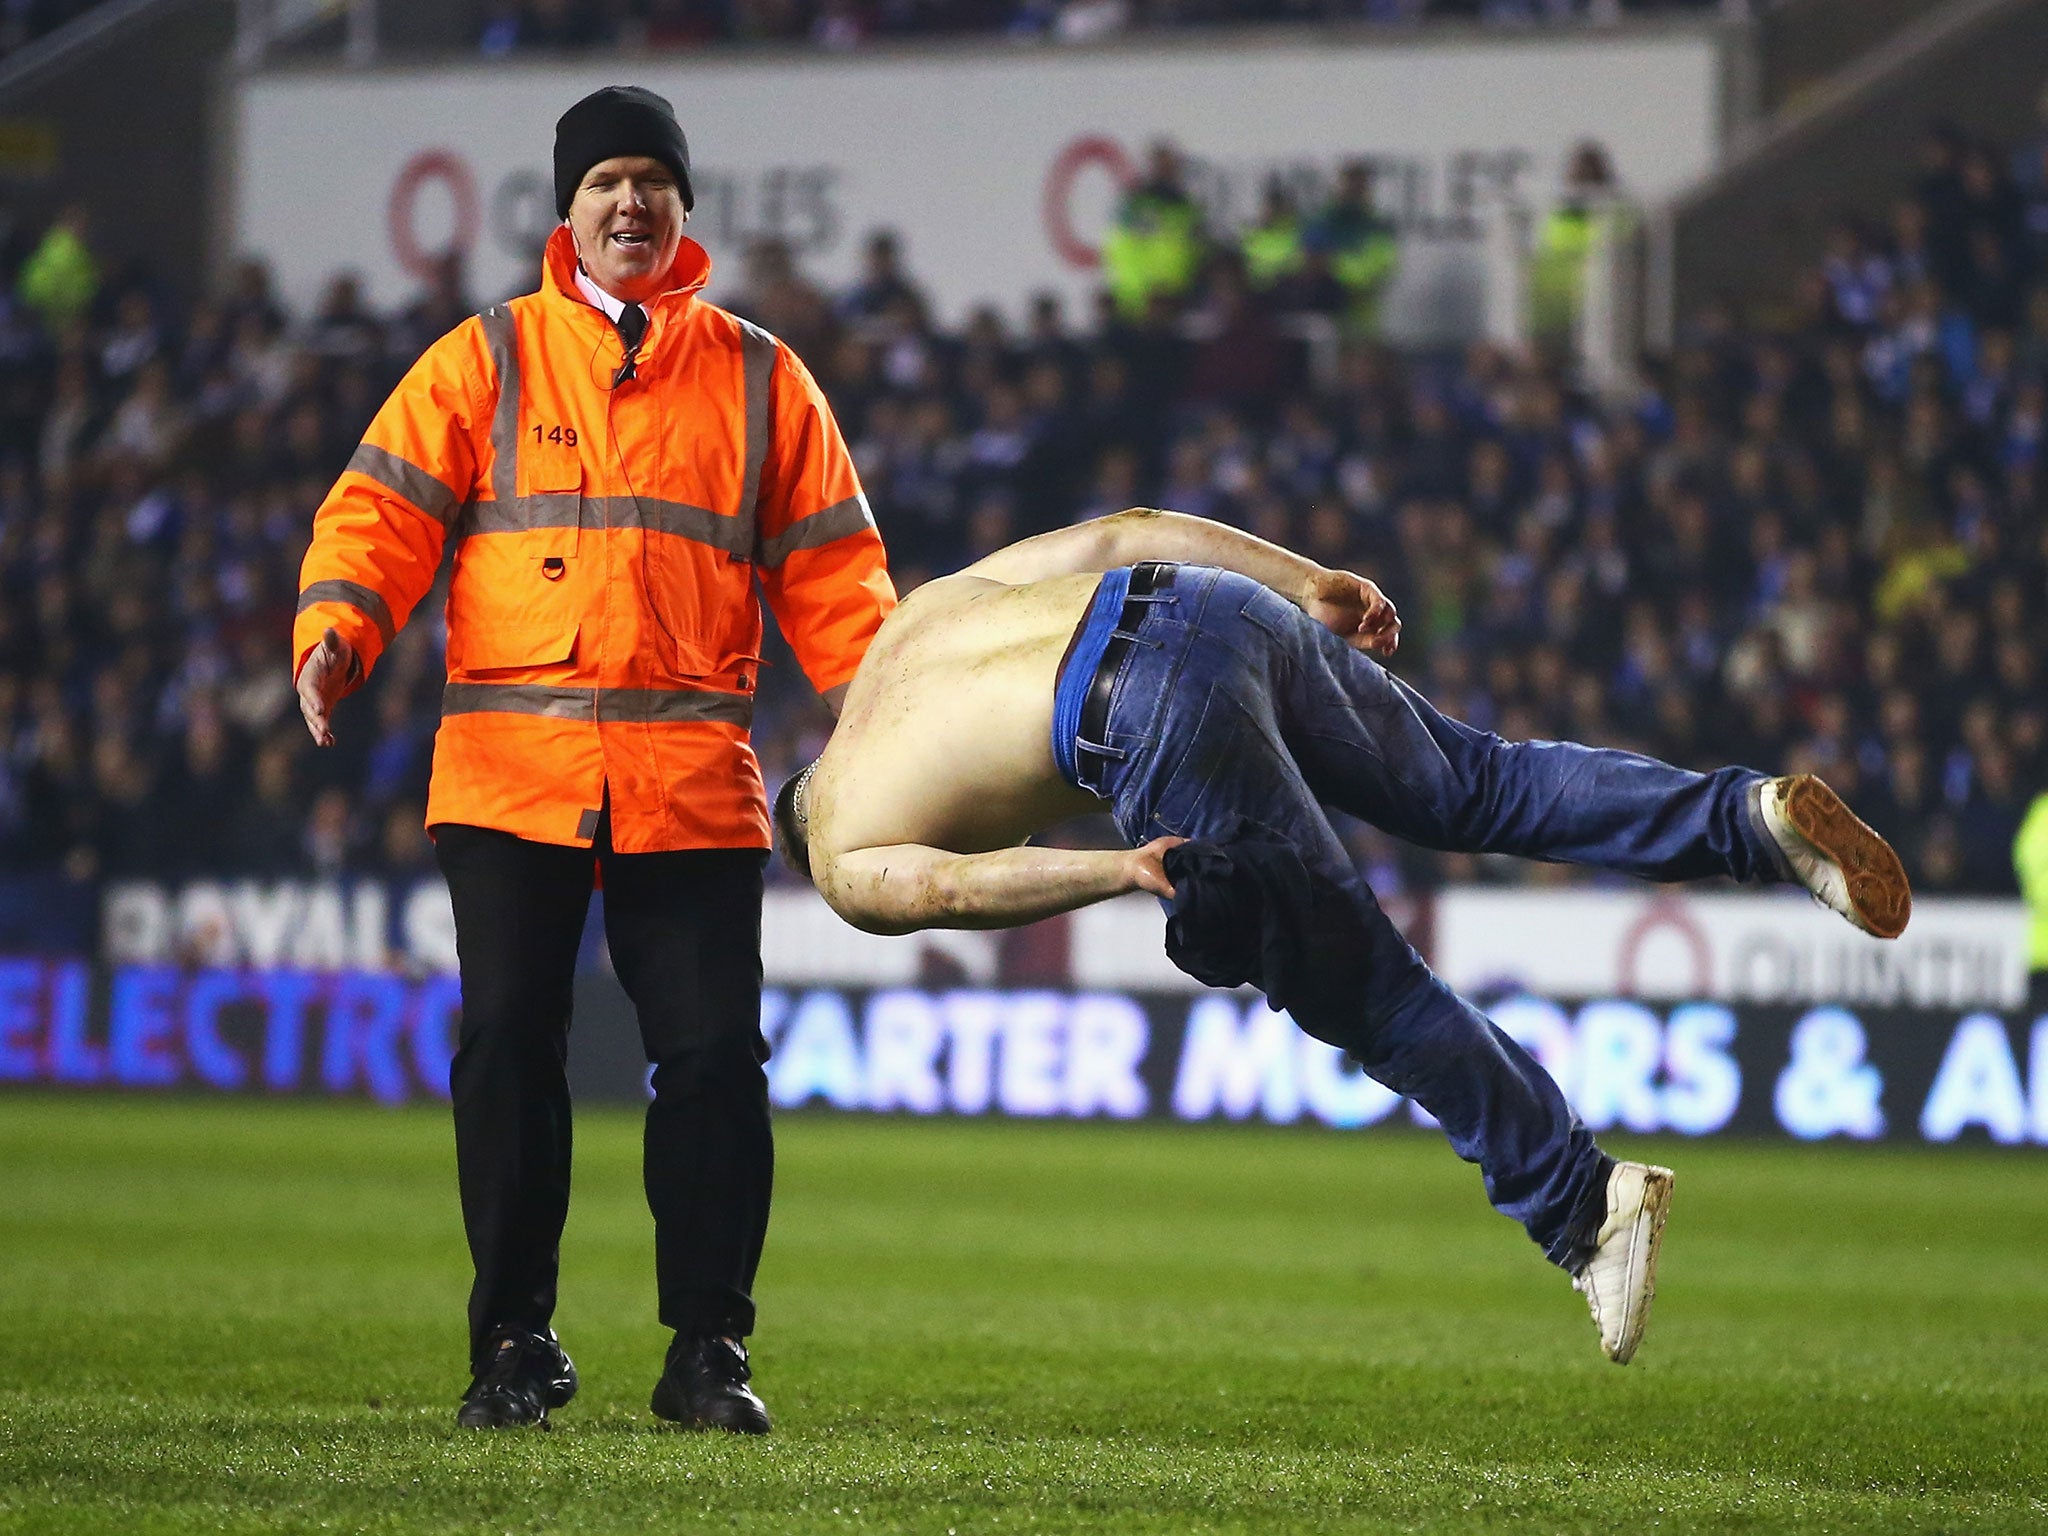 The pitch invader performed no fewer than four front flips